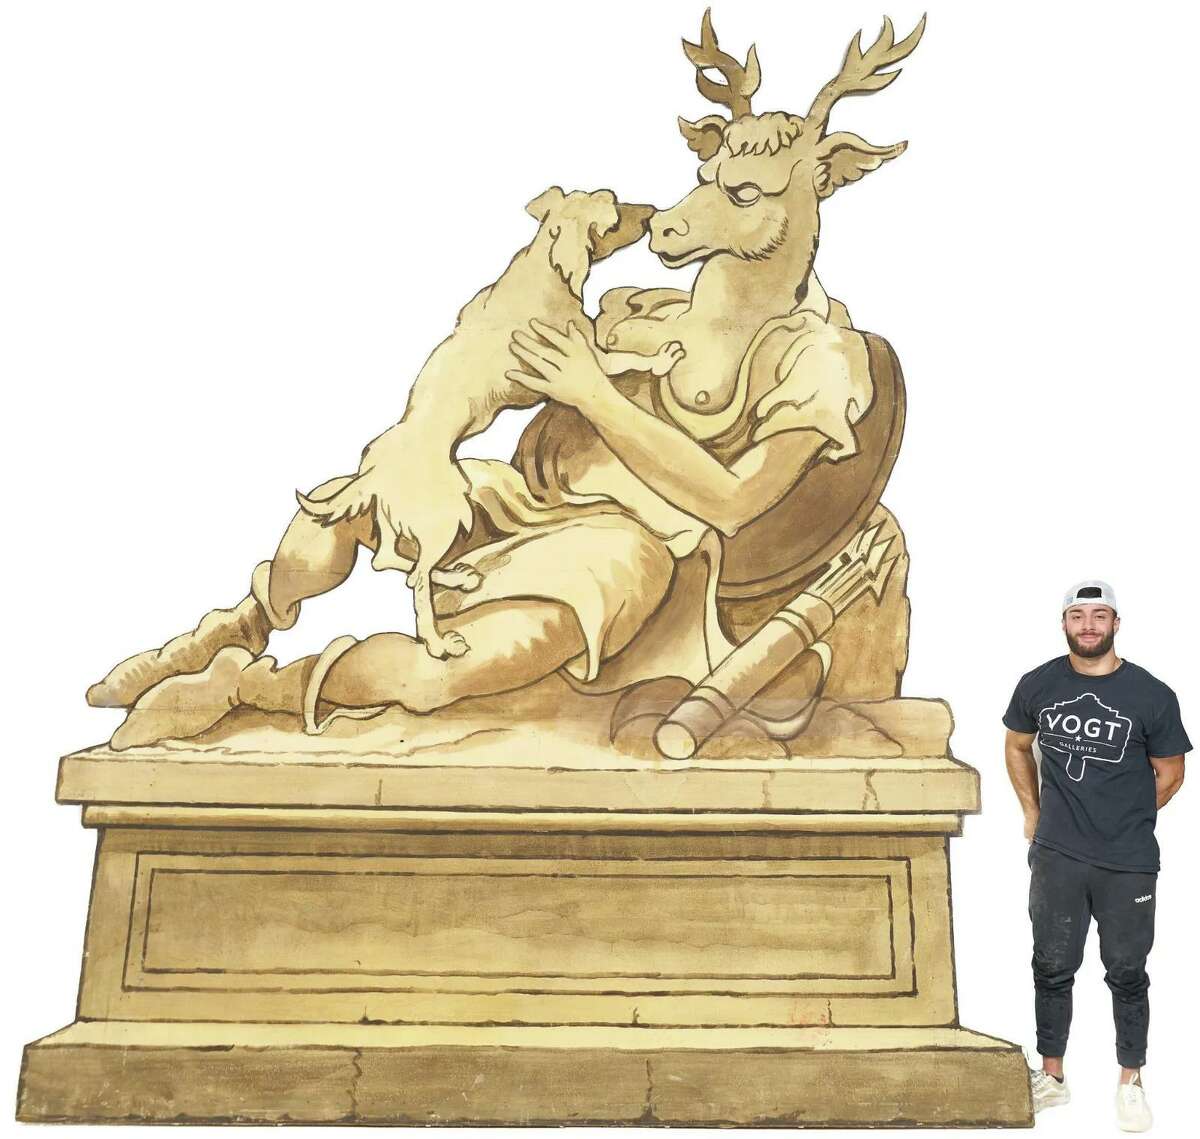 An enormous elk stage prop designed by Maurice Sendak is among the items once owned by the late Robert L.B. Tobin that will be sold by San Antonio-based Vogt Auction Galleries.